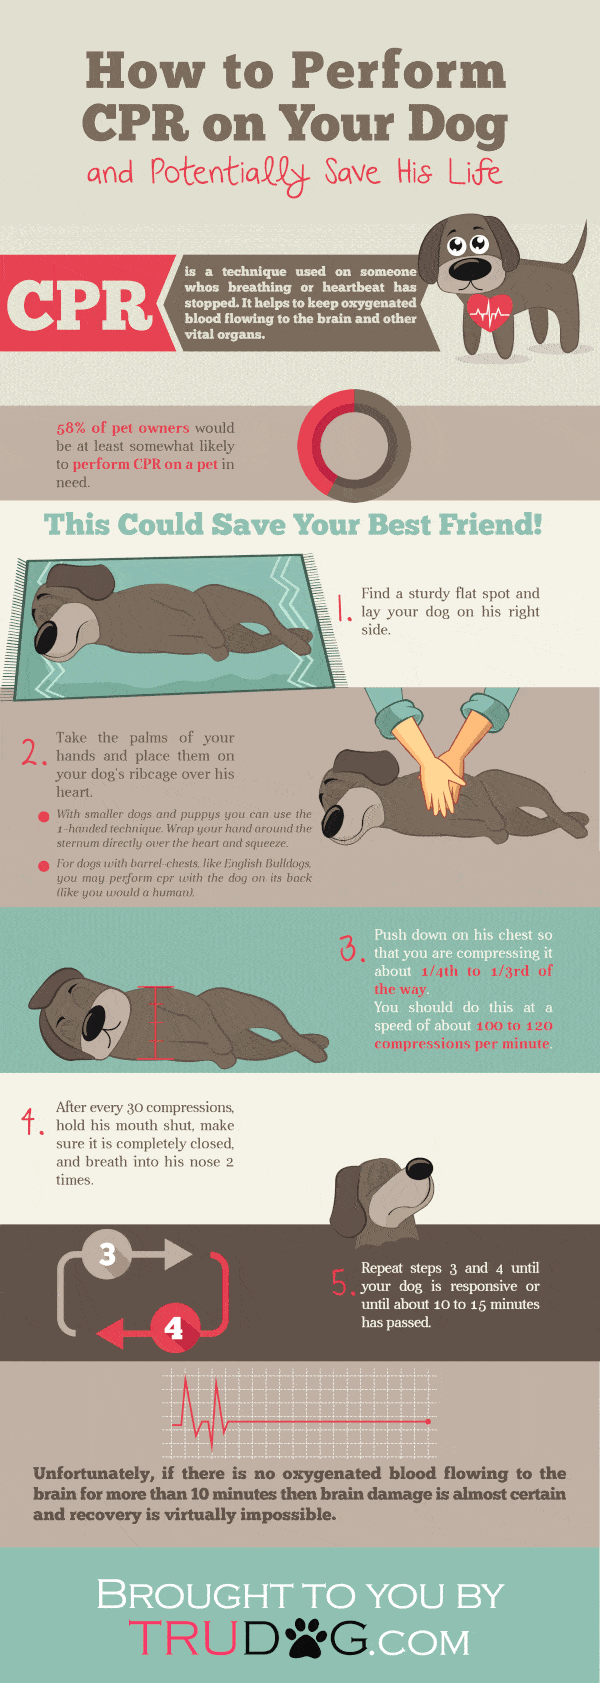 infographic describes how to perform CPR on a dog